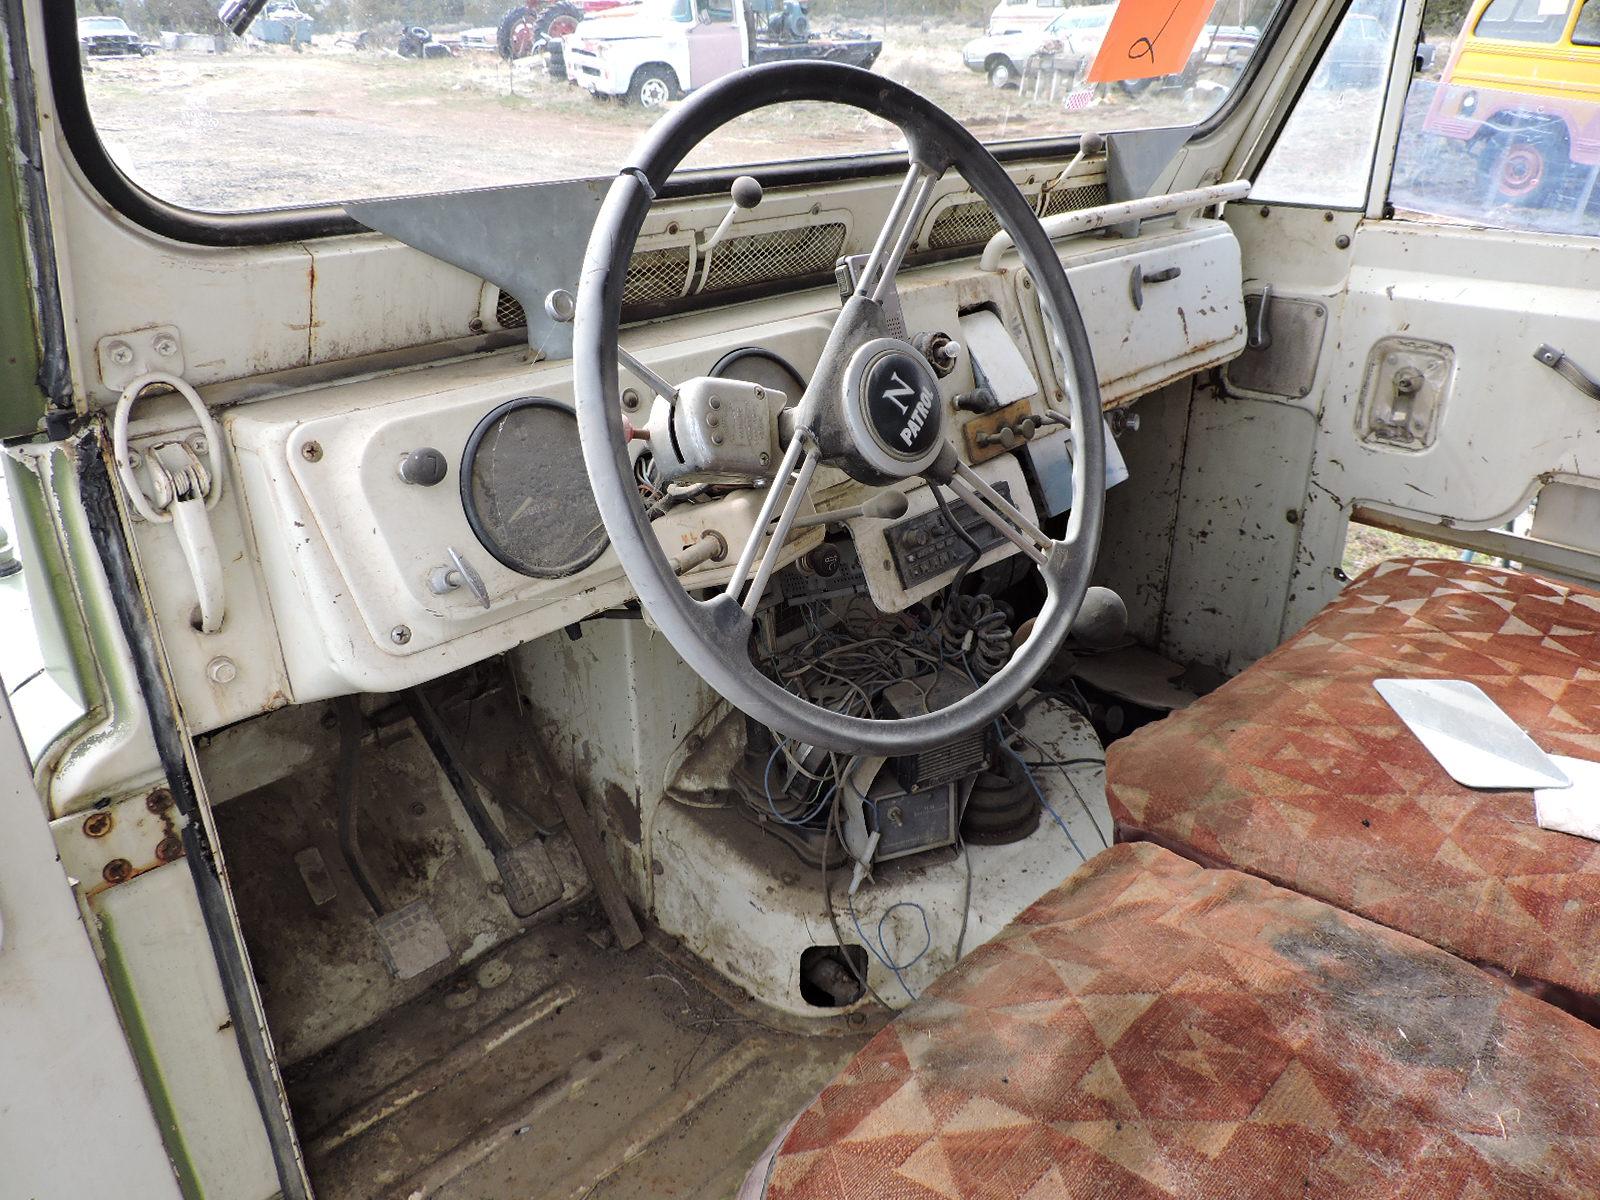 1969 Nissan Patrol with Removable Hardtop - 4WD, 6-Cyl., Manual Transmission